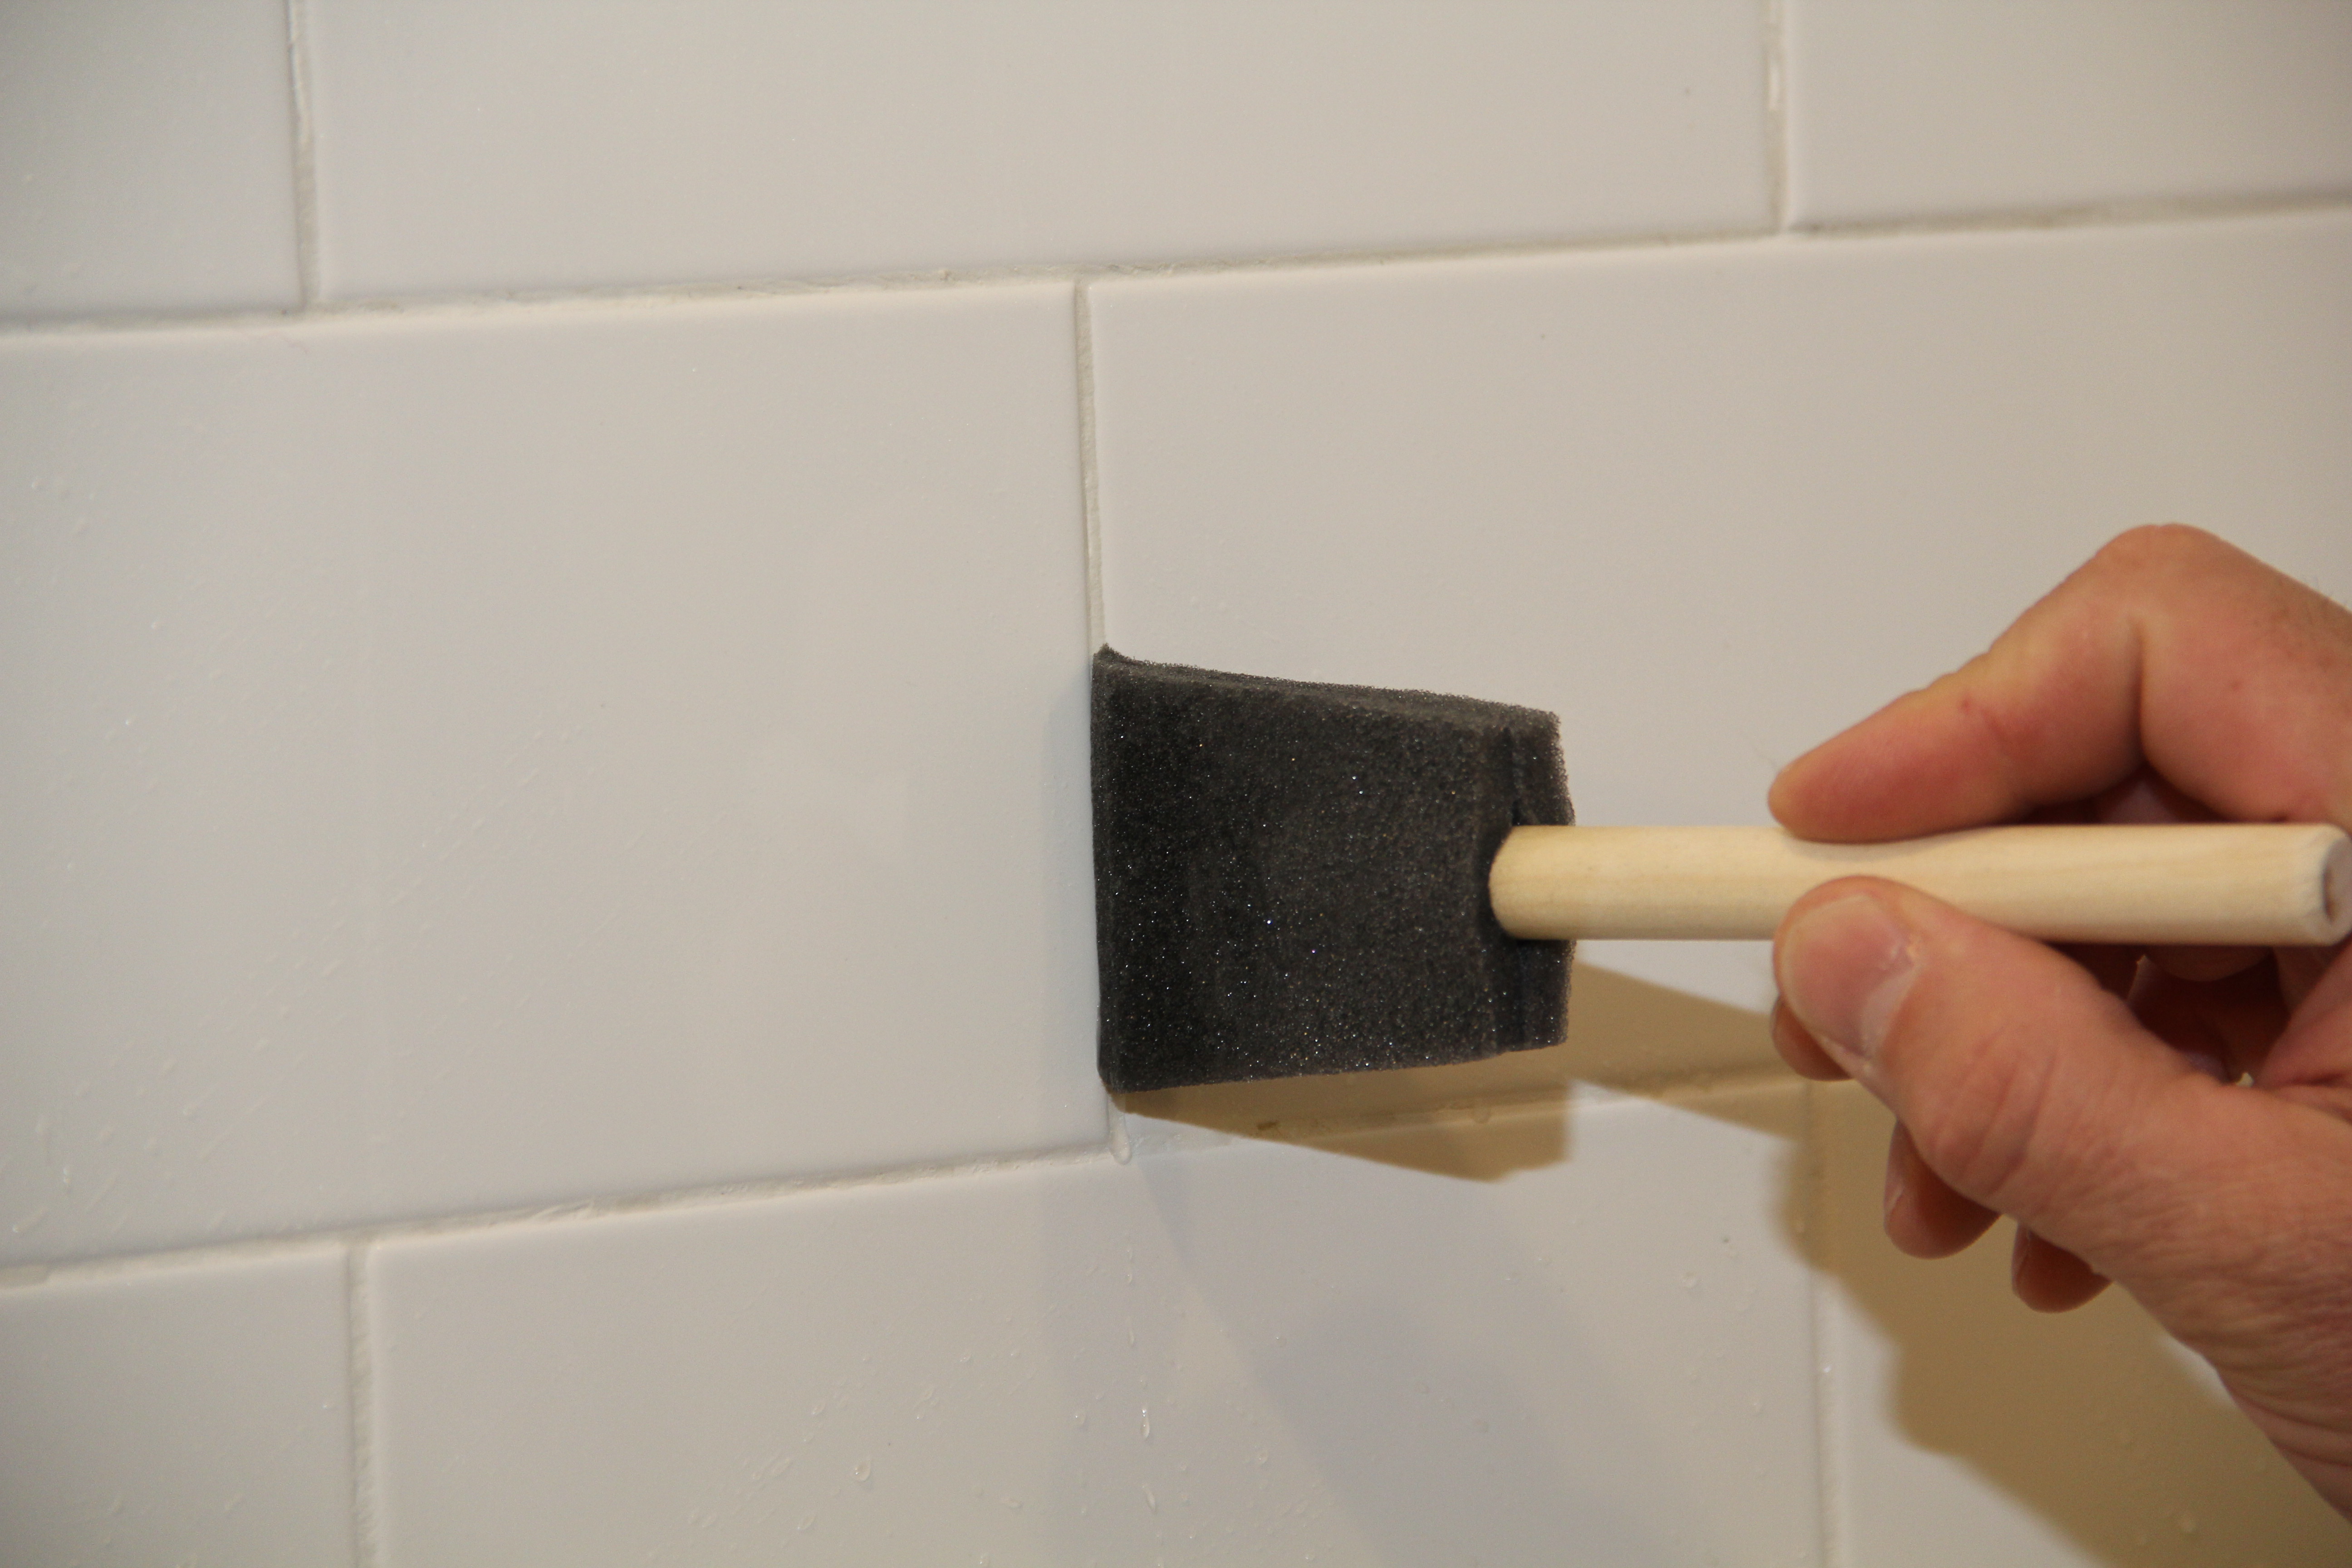 Sealing Tile And Grout Concord Carpenter, Does All Tile Grout Need To Be Sealed